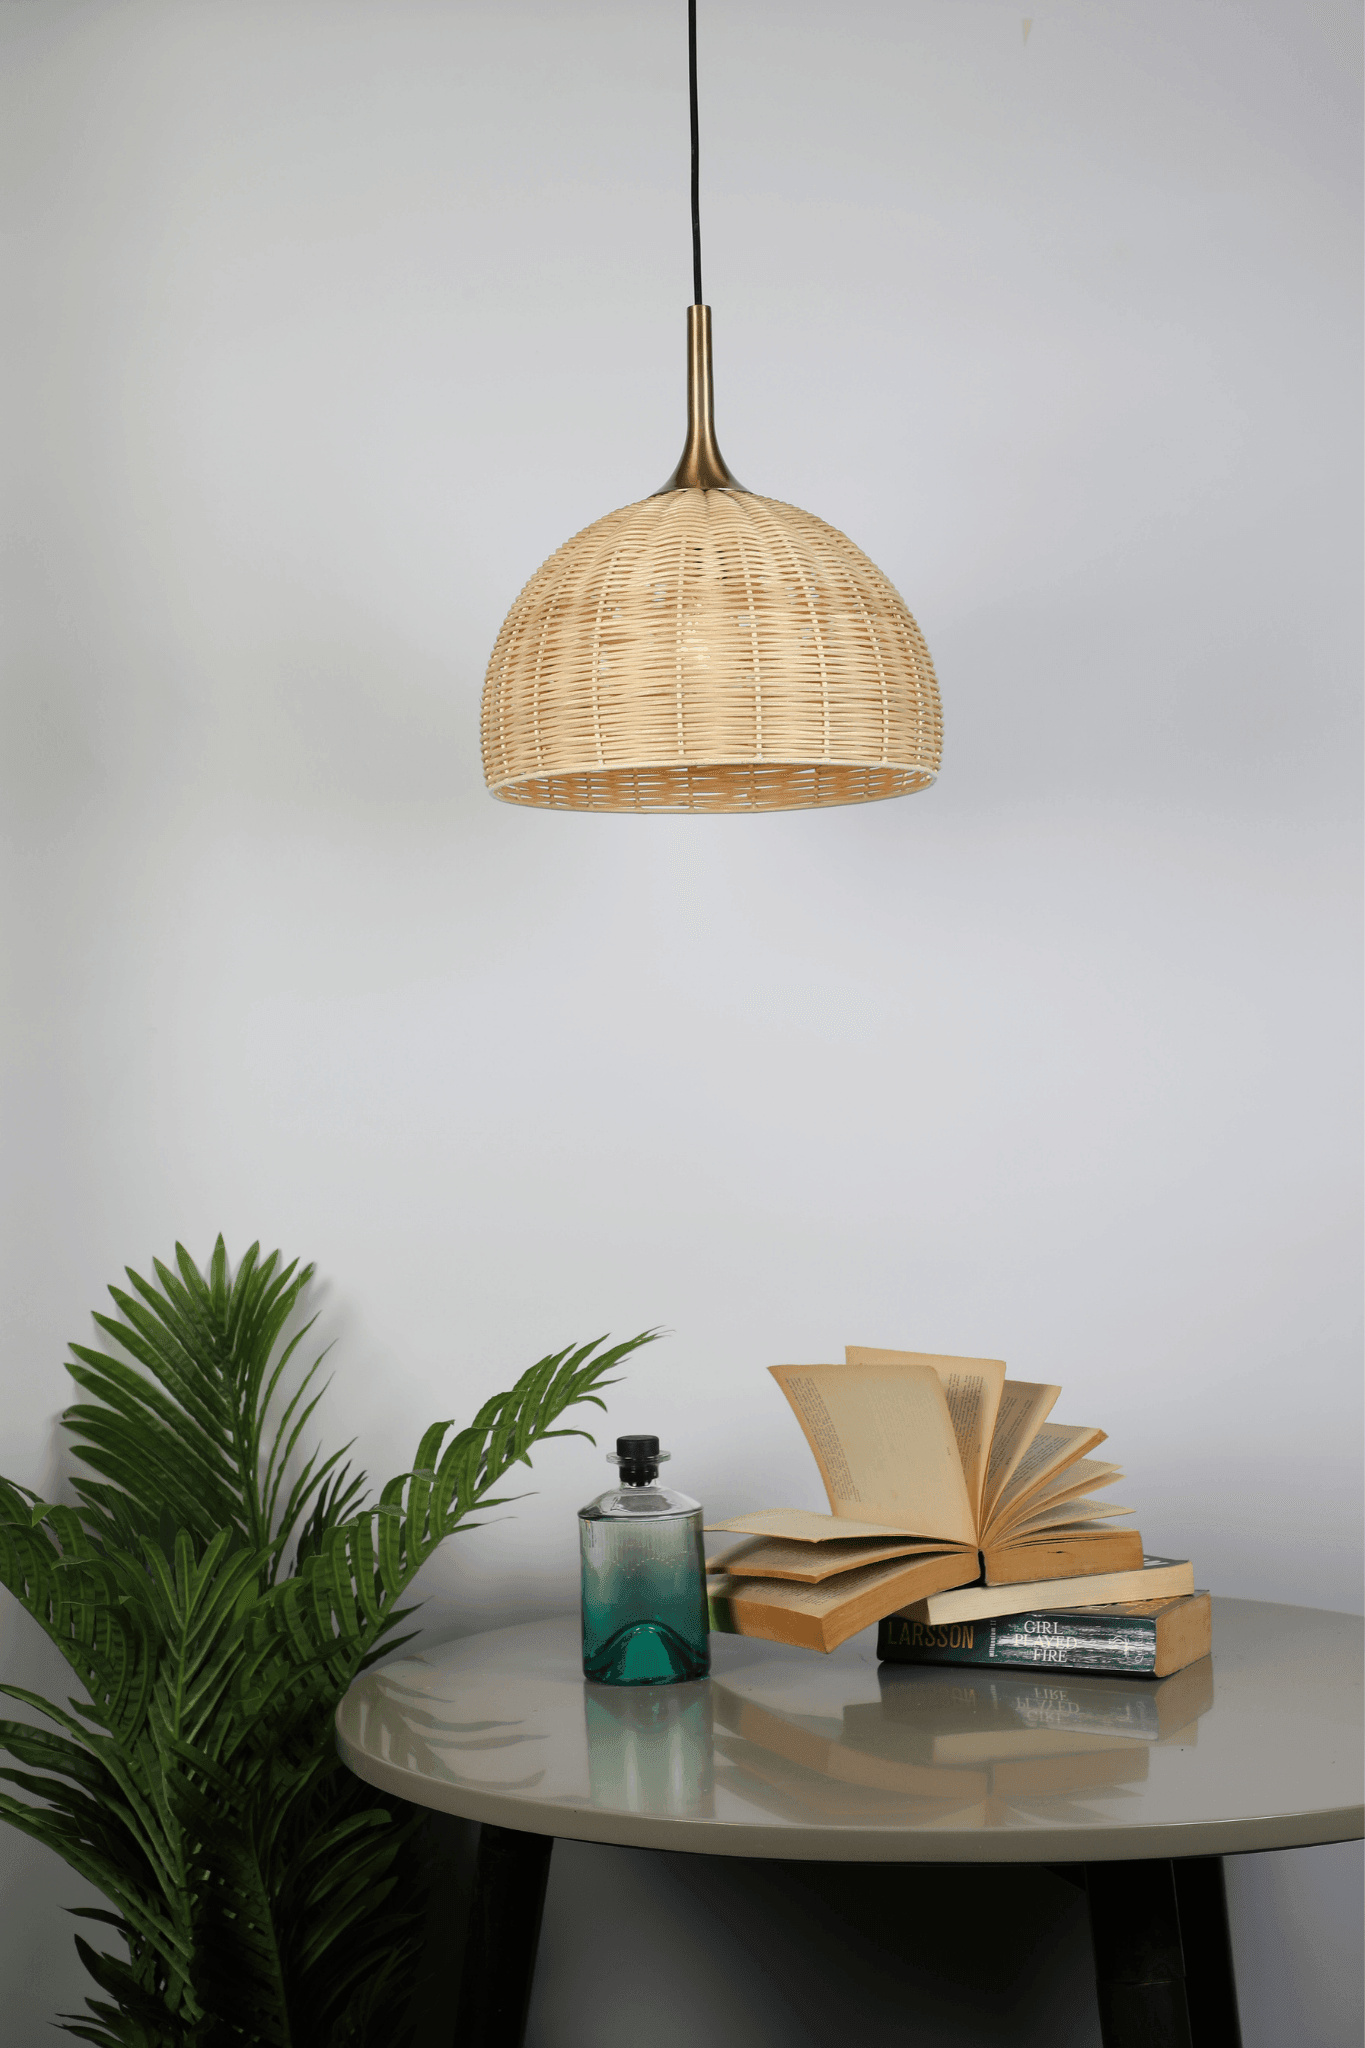 Stilu Handcrafted Pendant Light by The Light Library